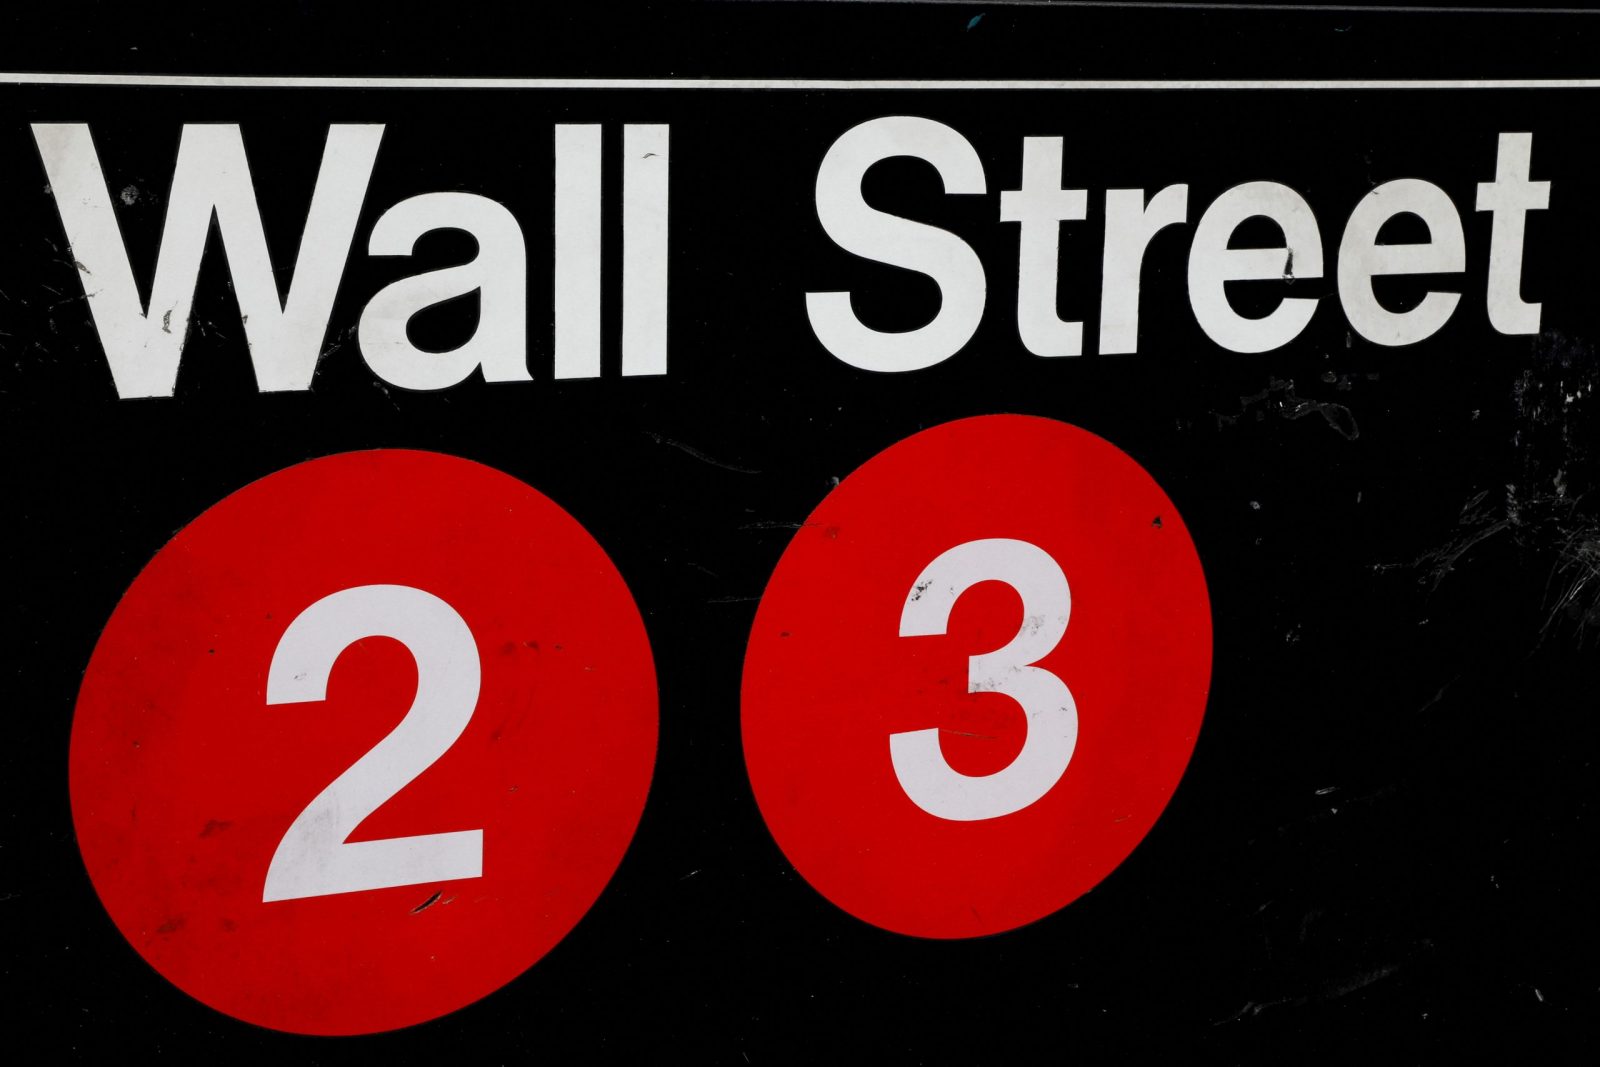 FILE PHOTO: A sign for the Wall Street subway station in the financial district in New York City, U.S., August 23, 2018. REUTERS/Brendan McDermid/File Photo Photo: BRENDAN MCDERMID/REUTERS